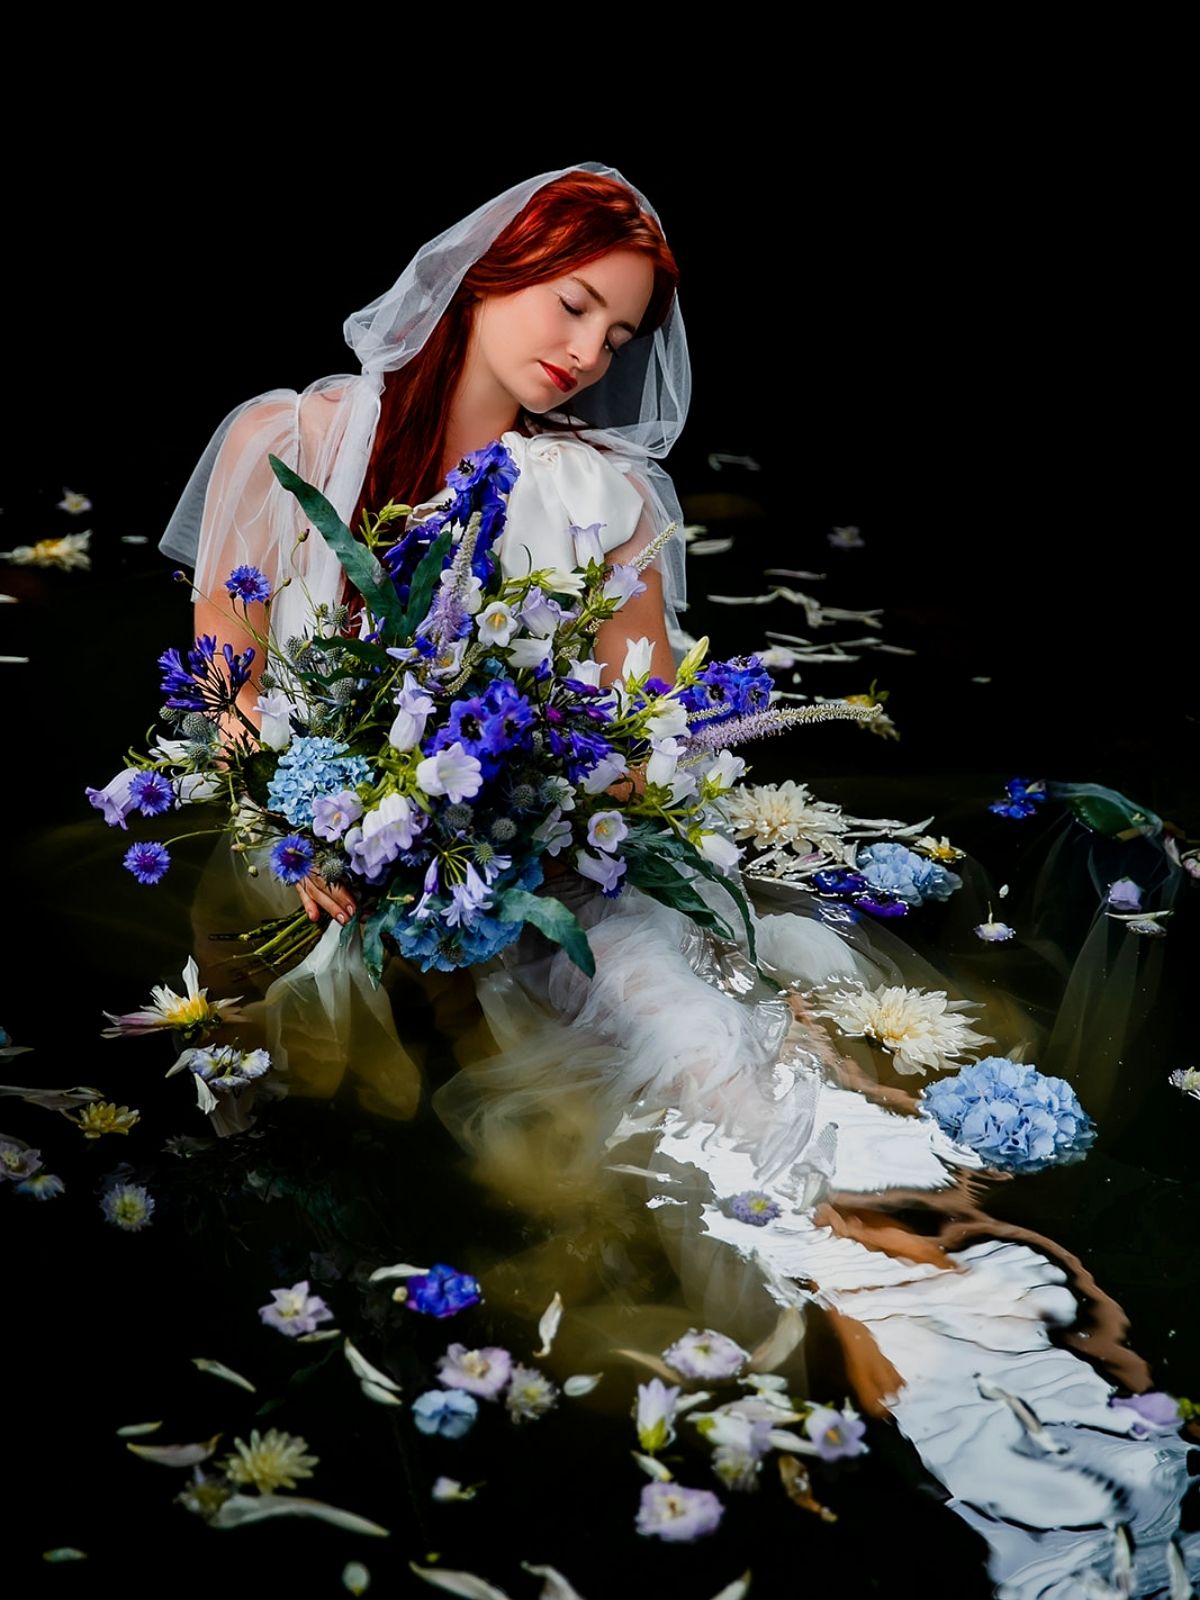 Ophelia - Josefien Goethals on Thursd - Blue Flowers with red hair model